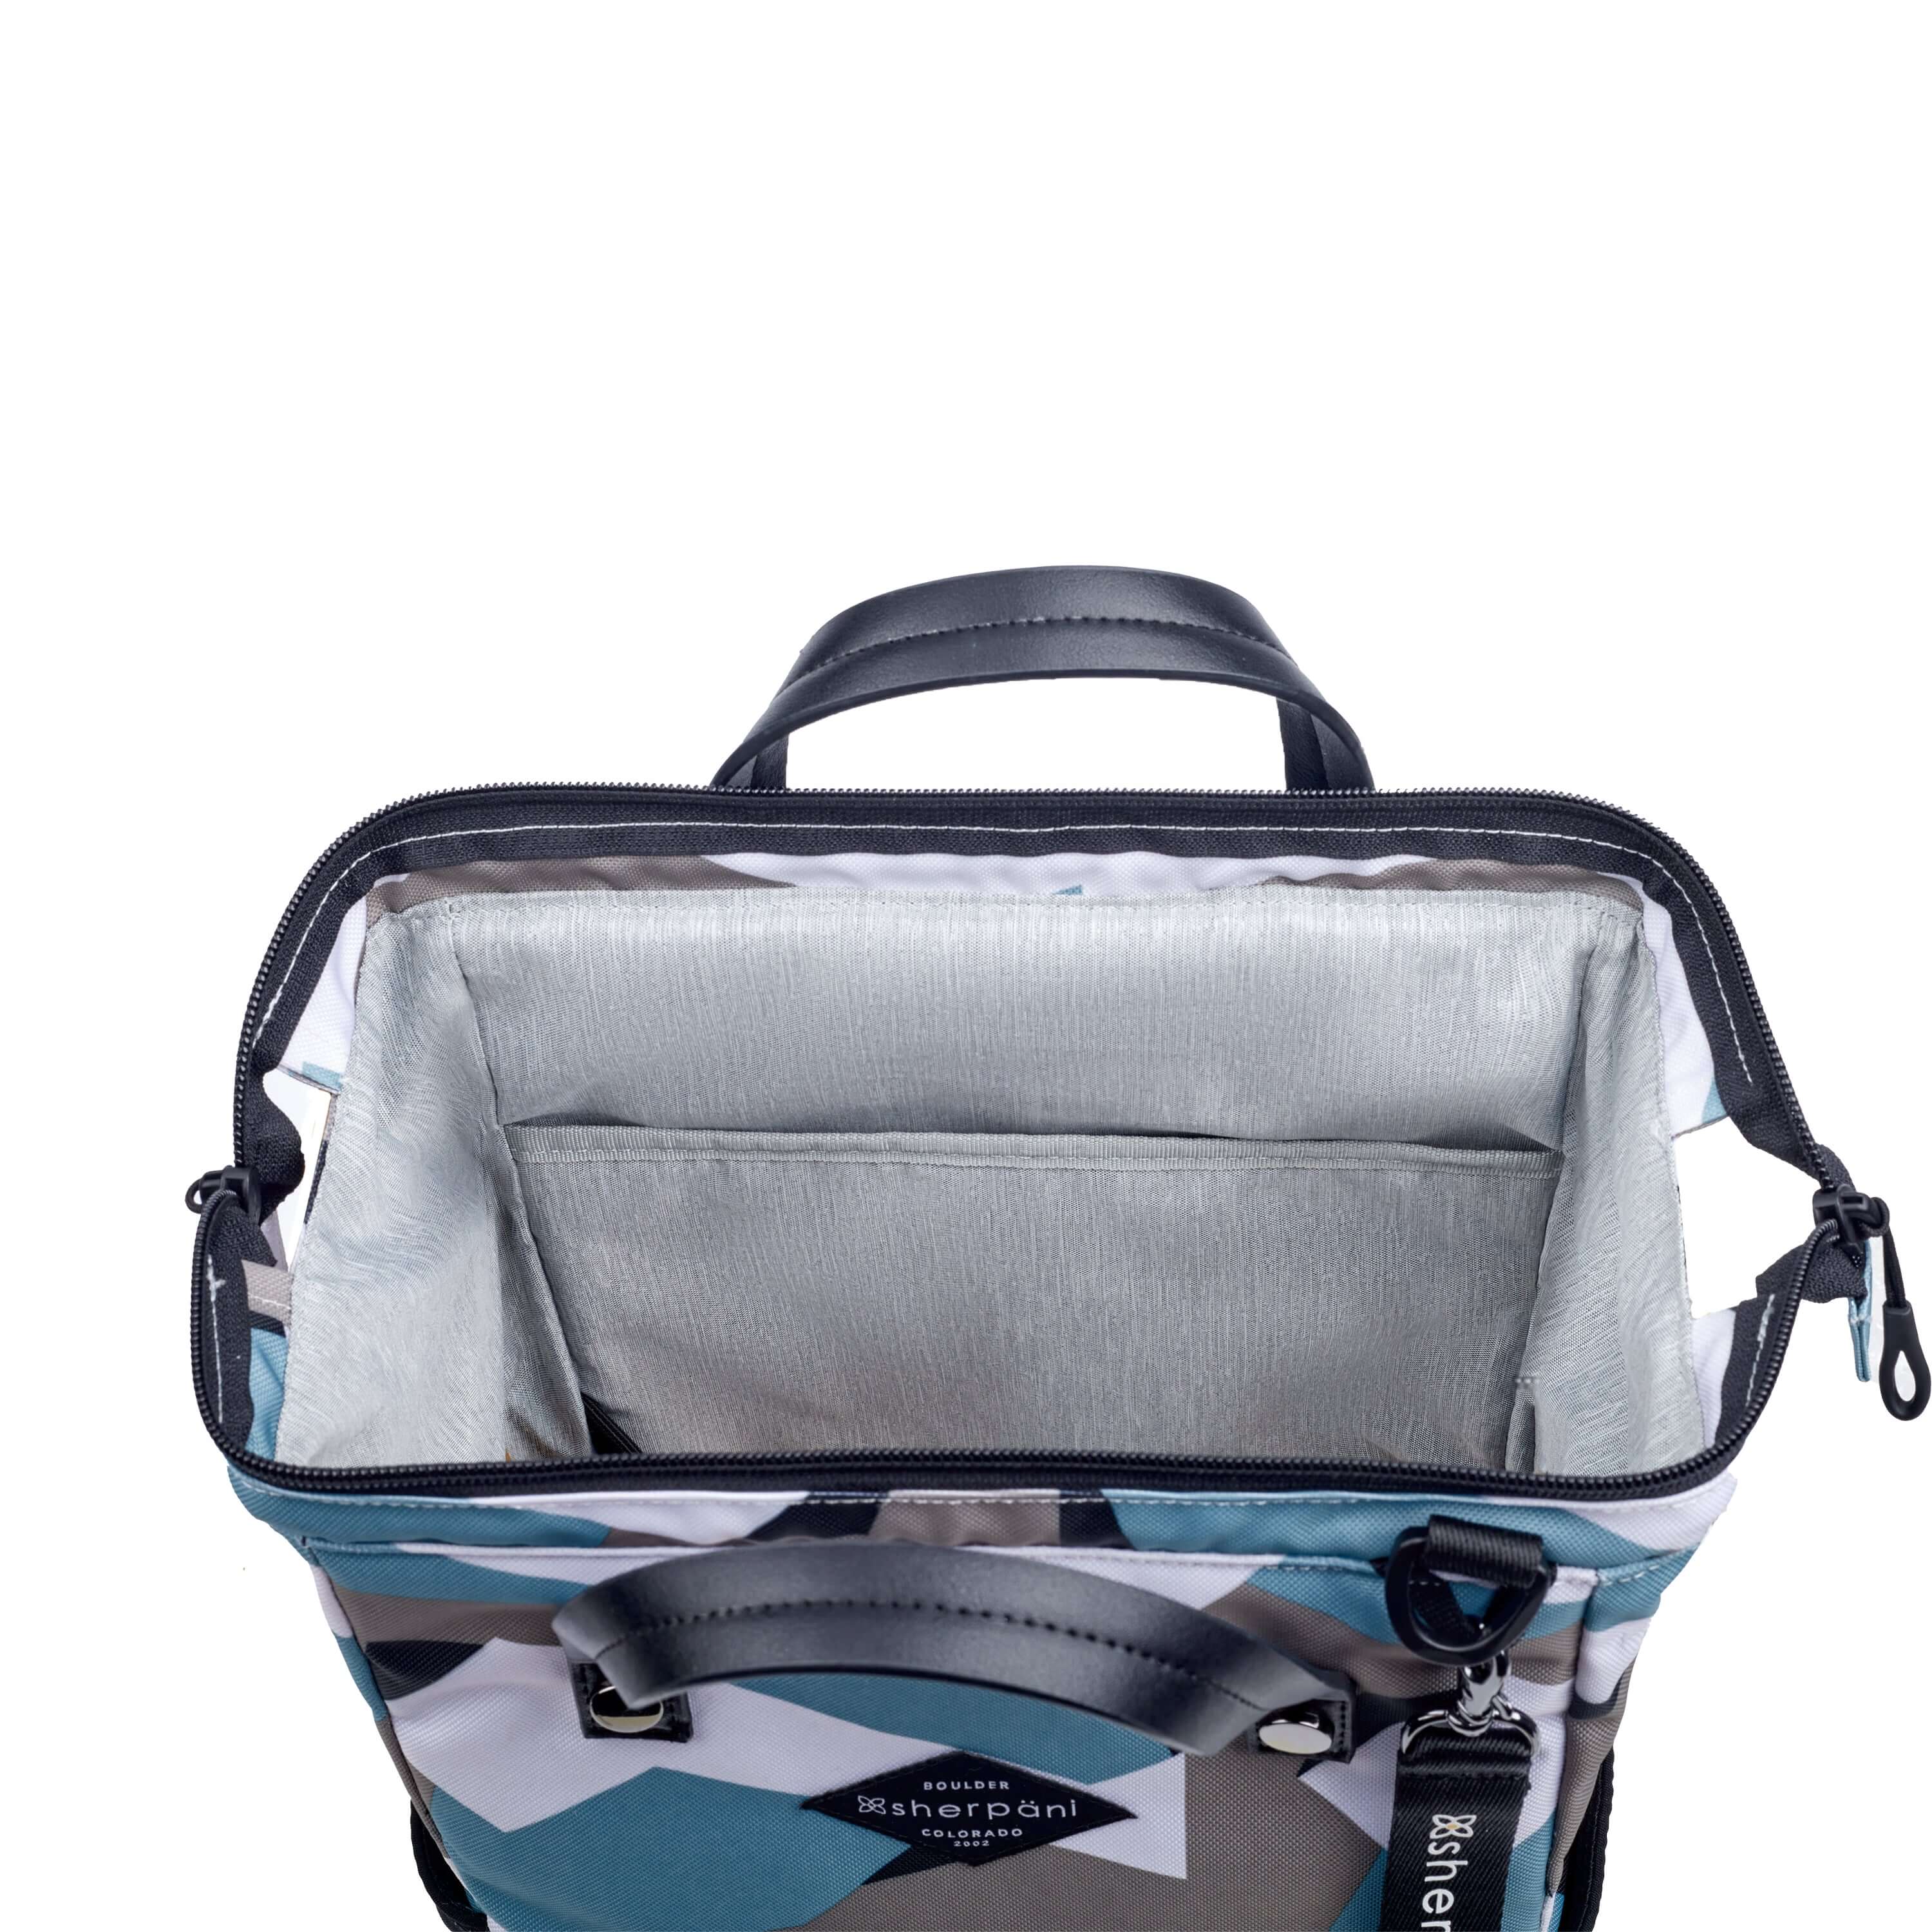 Top view of Sherpani three-in-one bag, the Dispatch in Summer Camo. The main zipper compartment is open to reveal a doctor bag style opening with a rectangular metal frame. The inside of the bag is light gray and features an internal pouch. 